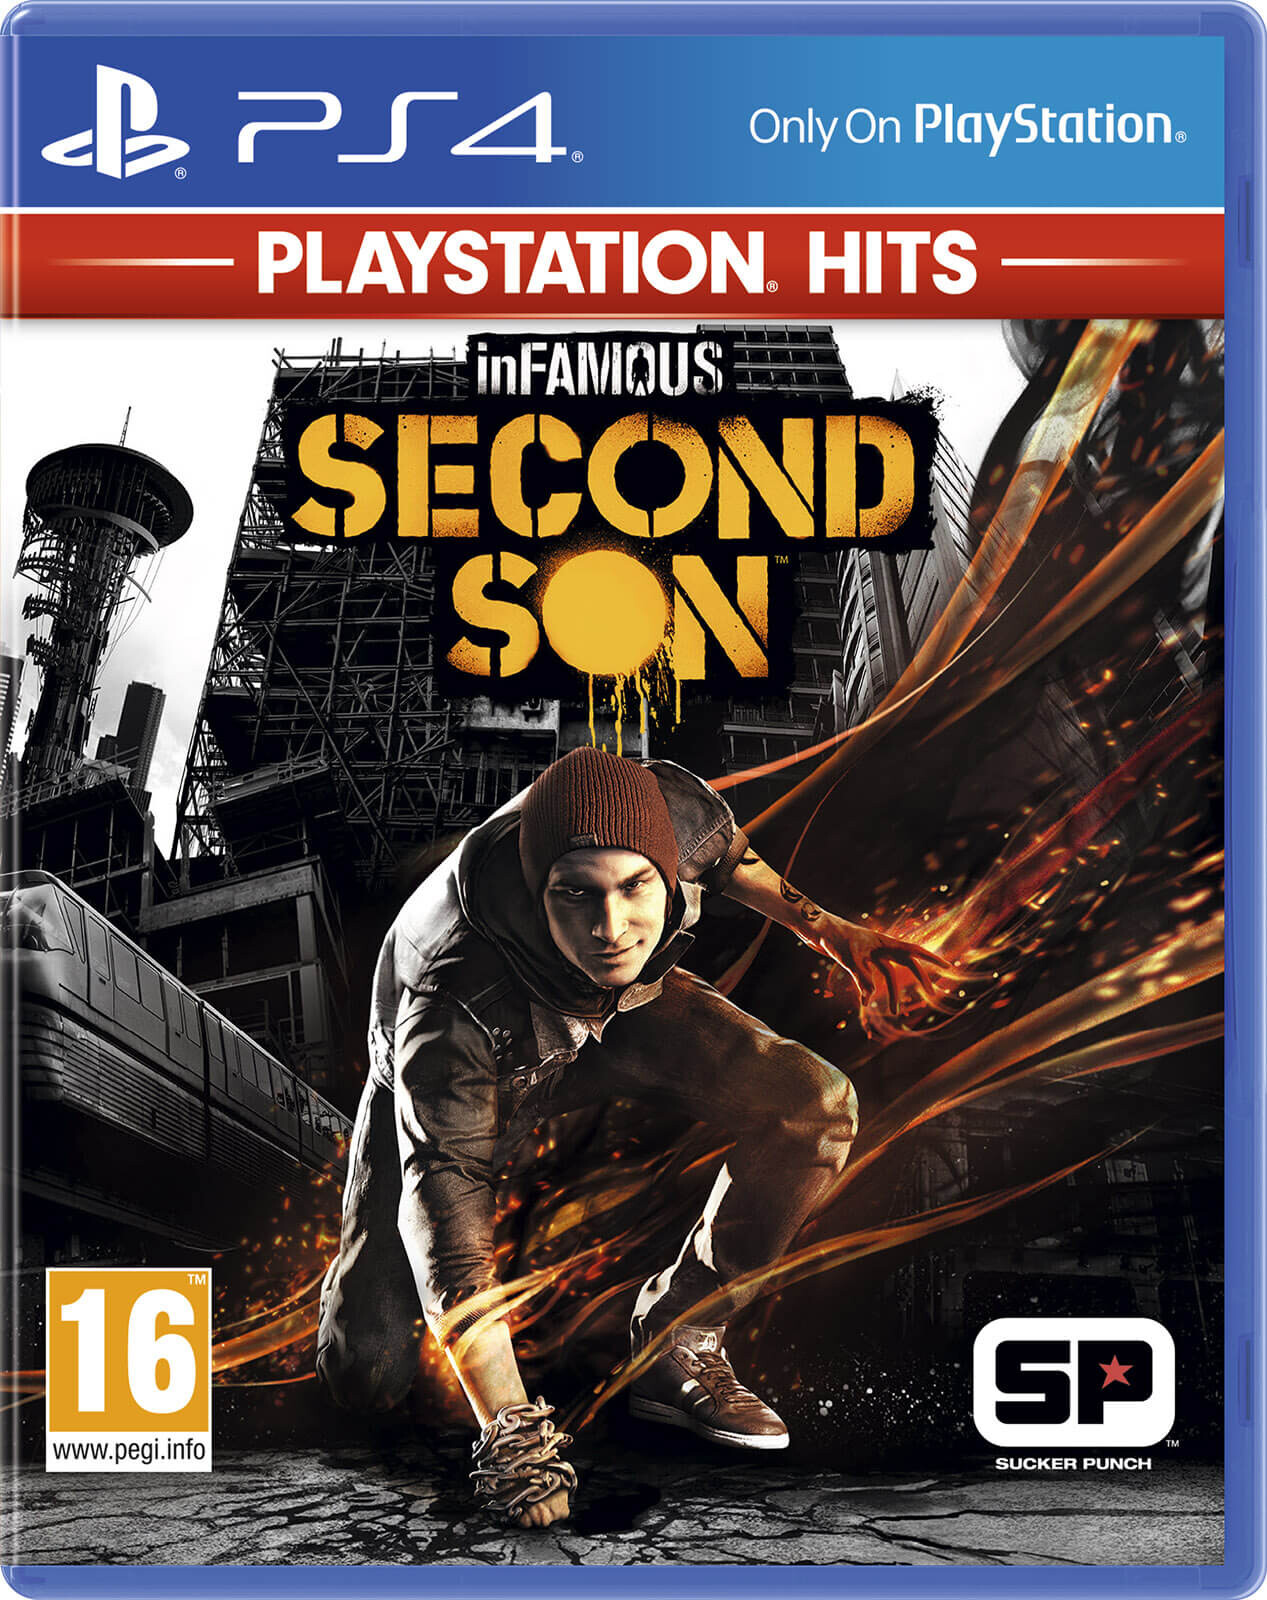 Infamous: Second Son (playstation Hits) - PS4